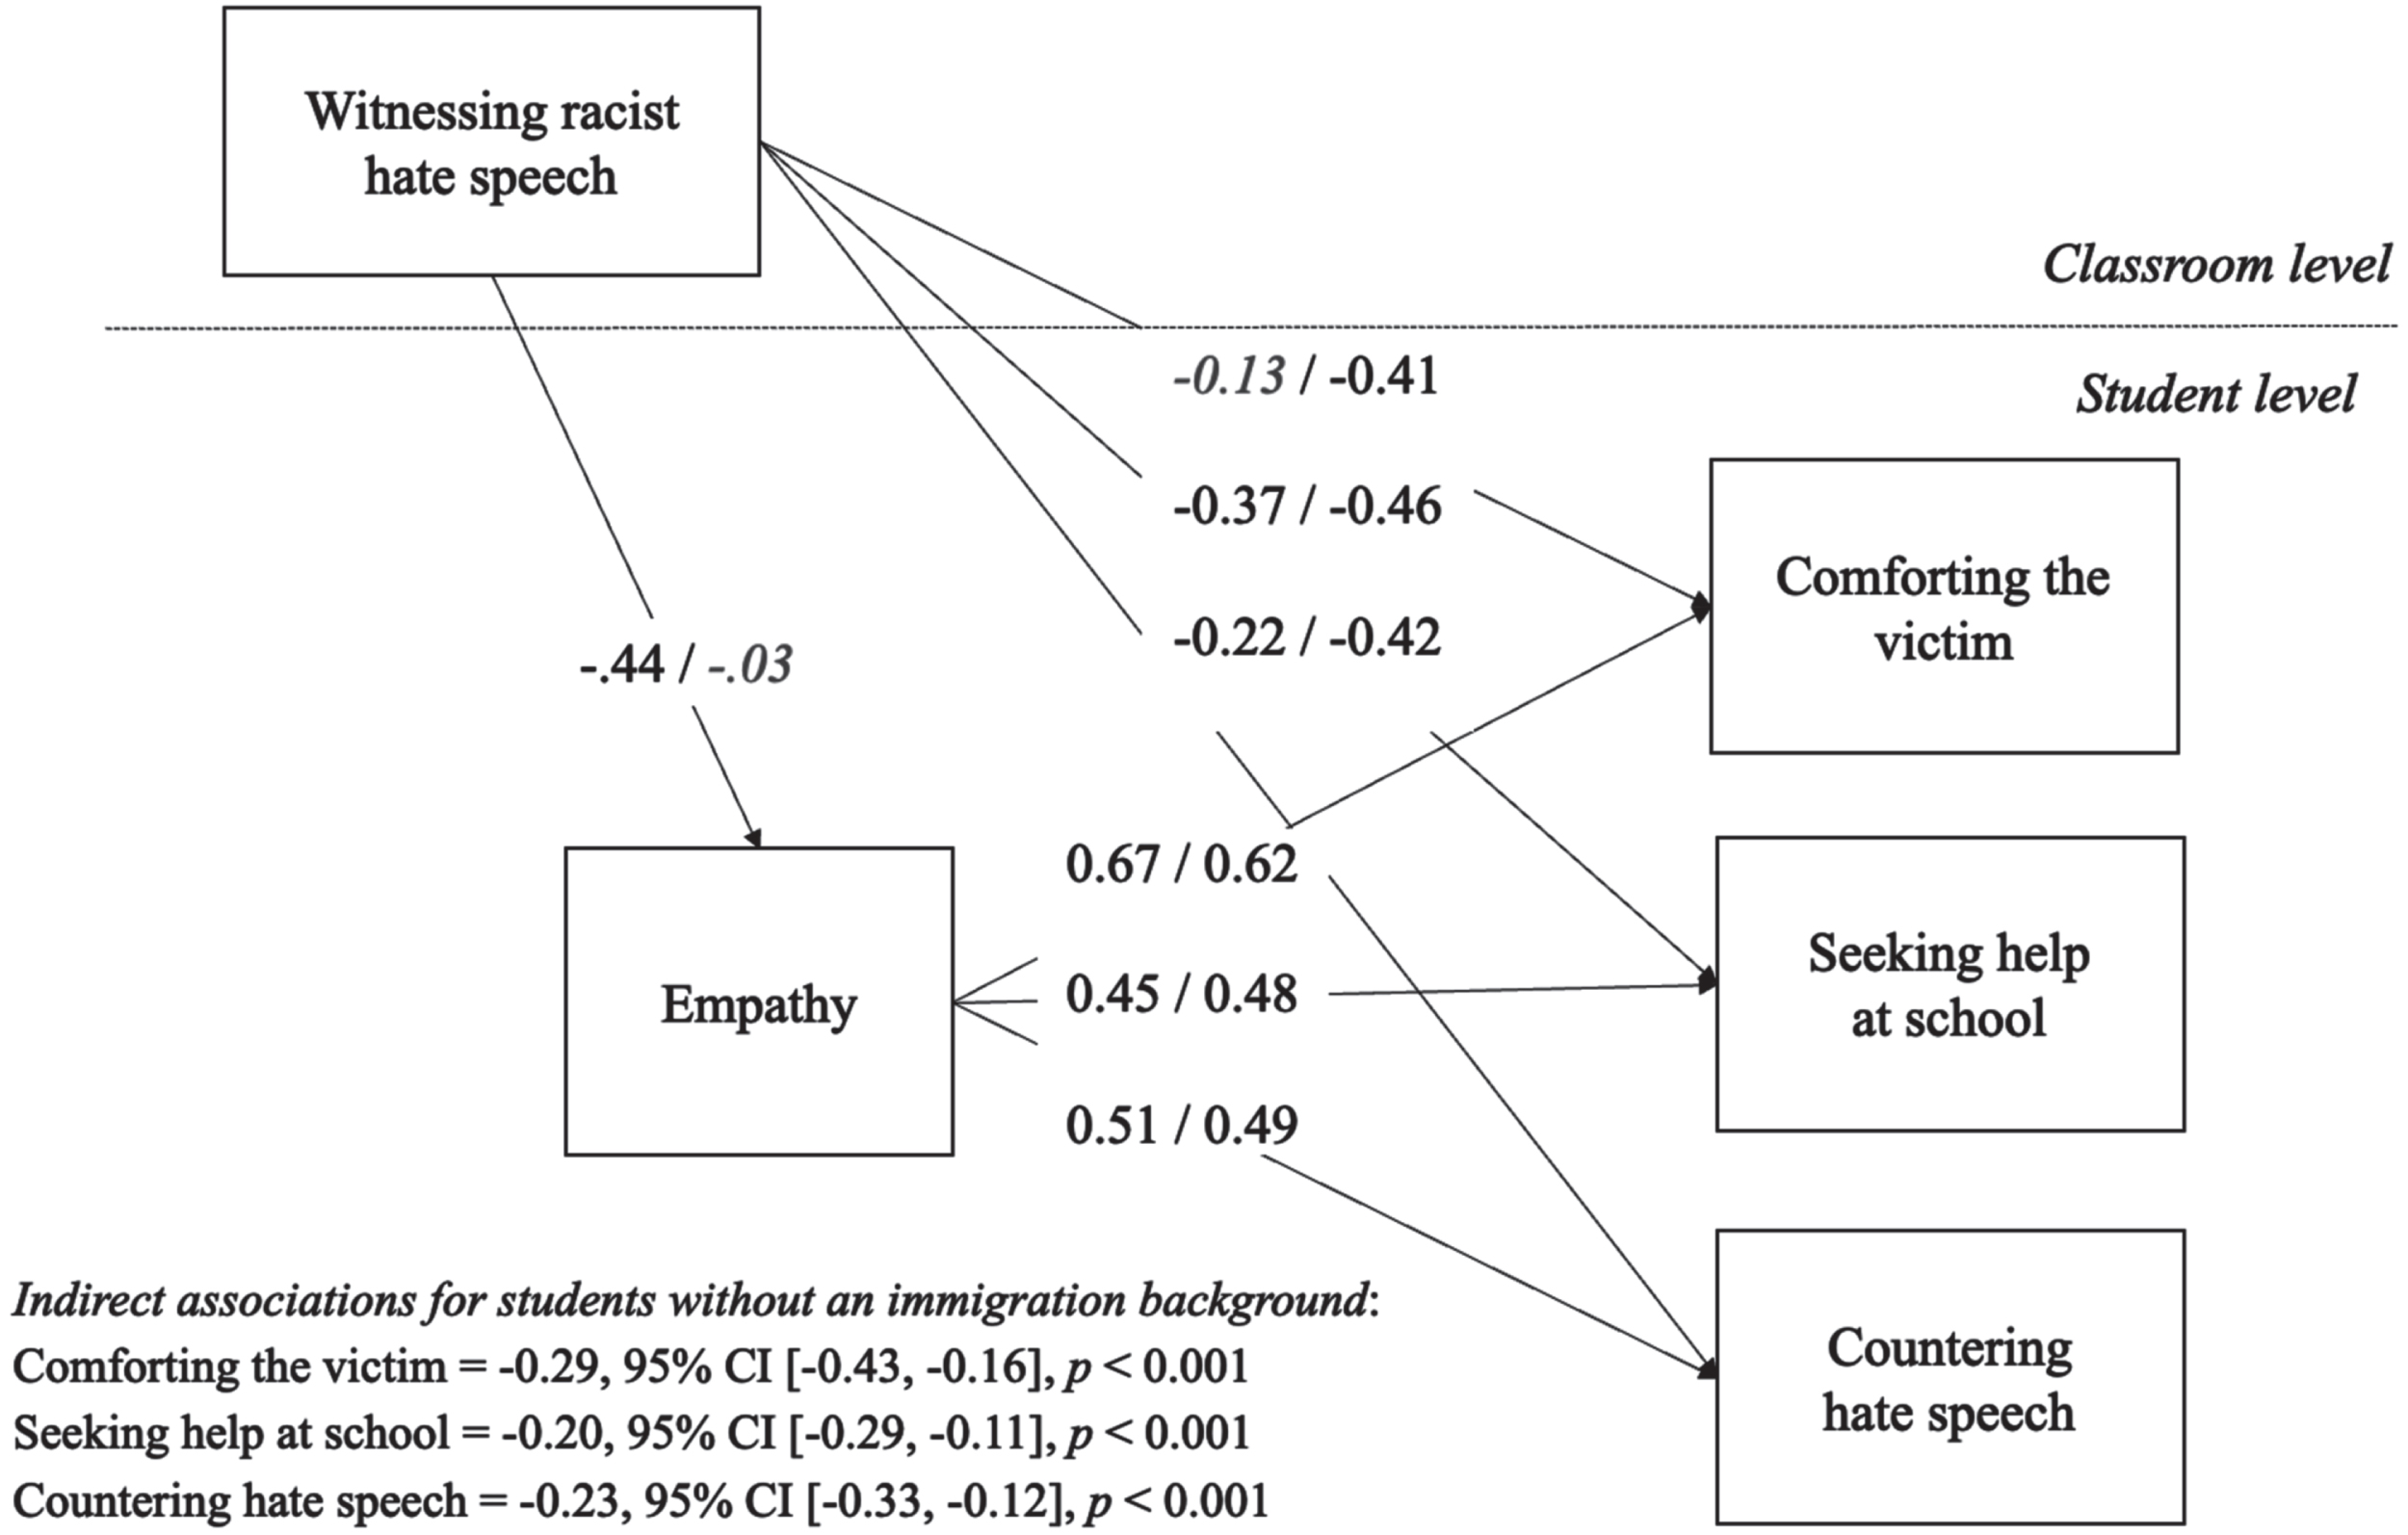 Direct and Indirect Associations between Classroom Racist Hate Speech and Active Defending Bystander Responses, via Empathy –Differences by Immigration BackgroundNote. Unstandardized coefficients are shown. Control variables are not displayed for clarity. For each path, the number on the left displays the coefficient for students without an immigration background (n = 1,873), and the number on the right displays the coefficient for students with a migration background (n = 1,300). All coefficients shown are statistically significant except for those displayed in italics.